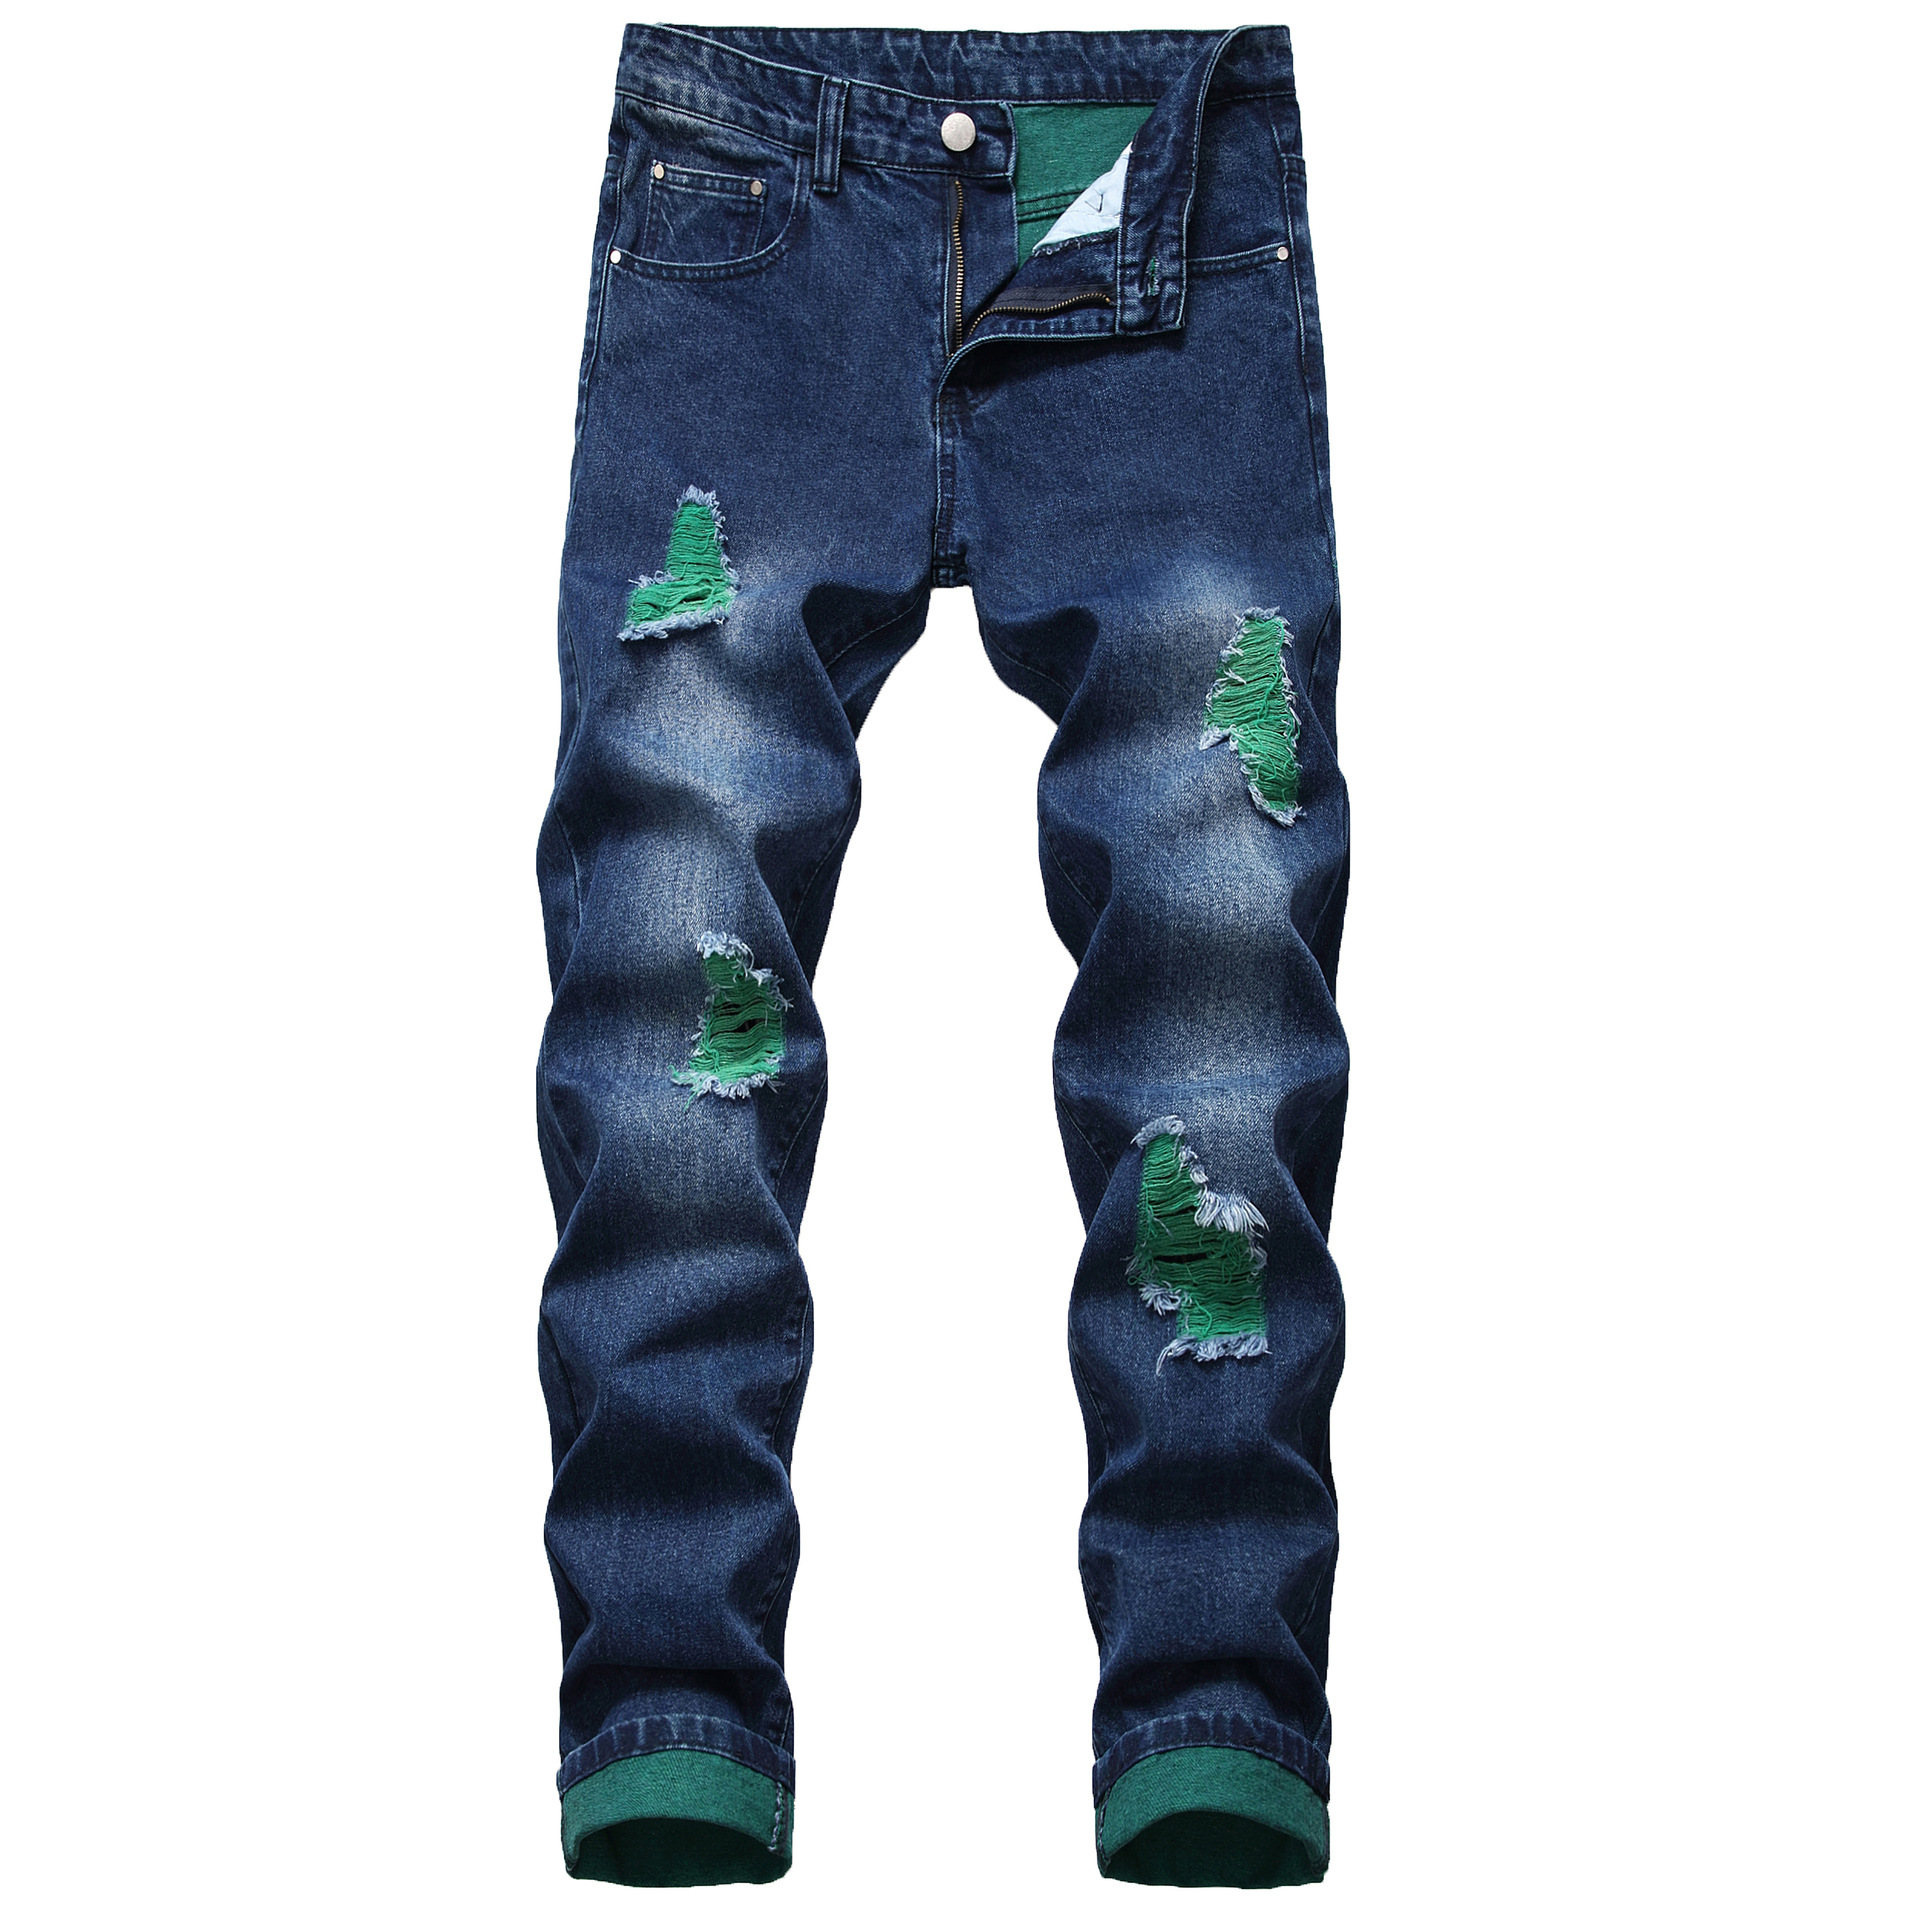 Manufacturing Companies for 501 Skinny  Jeans - men’s ripped jeans Amazon Europe and America color ripped men’s denim trousers – Yulin